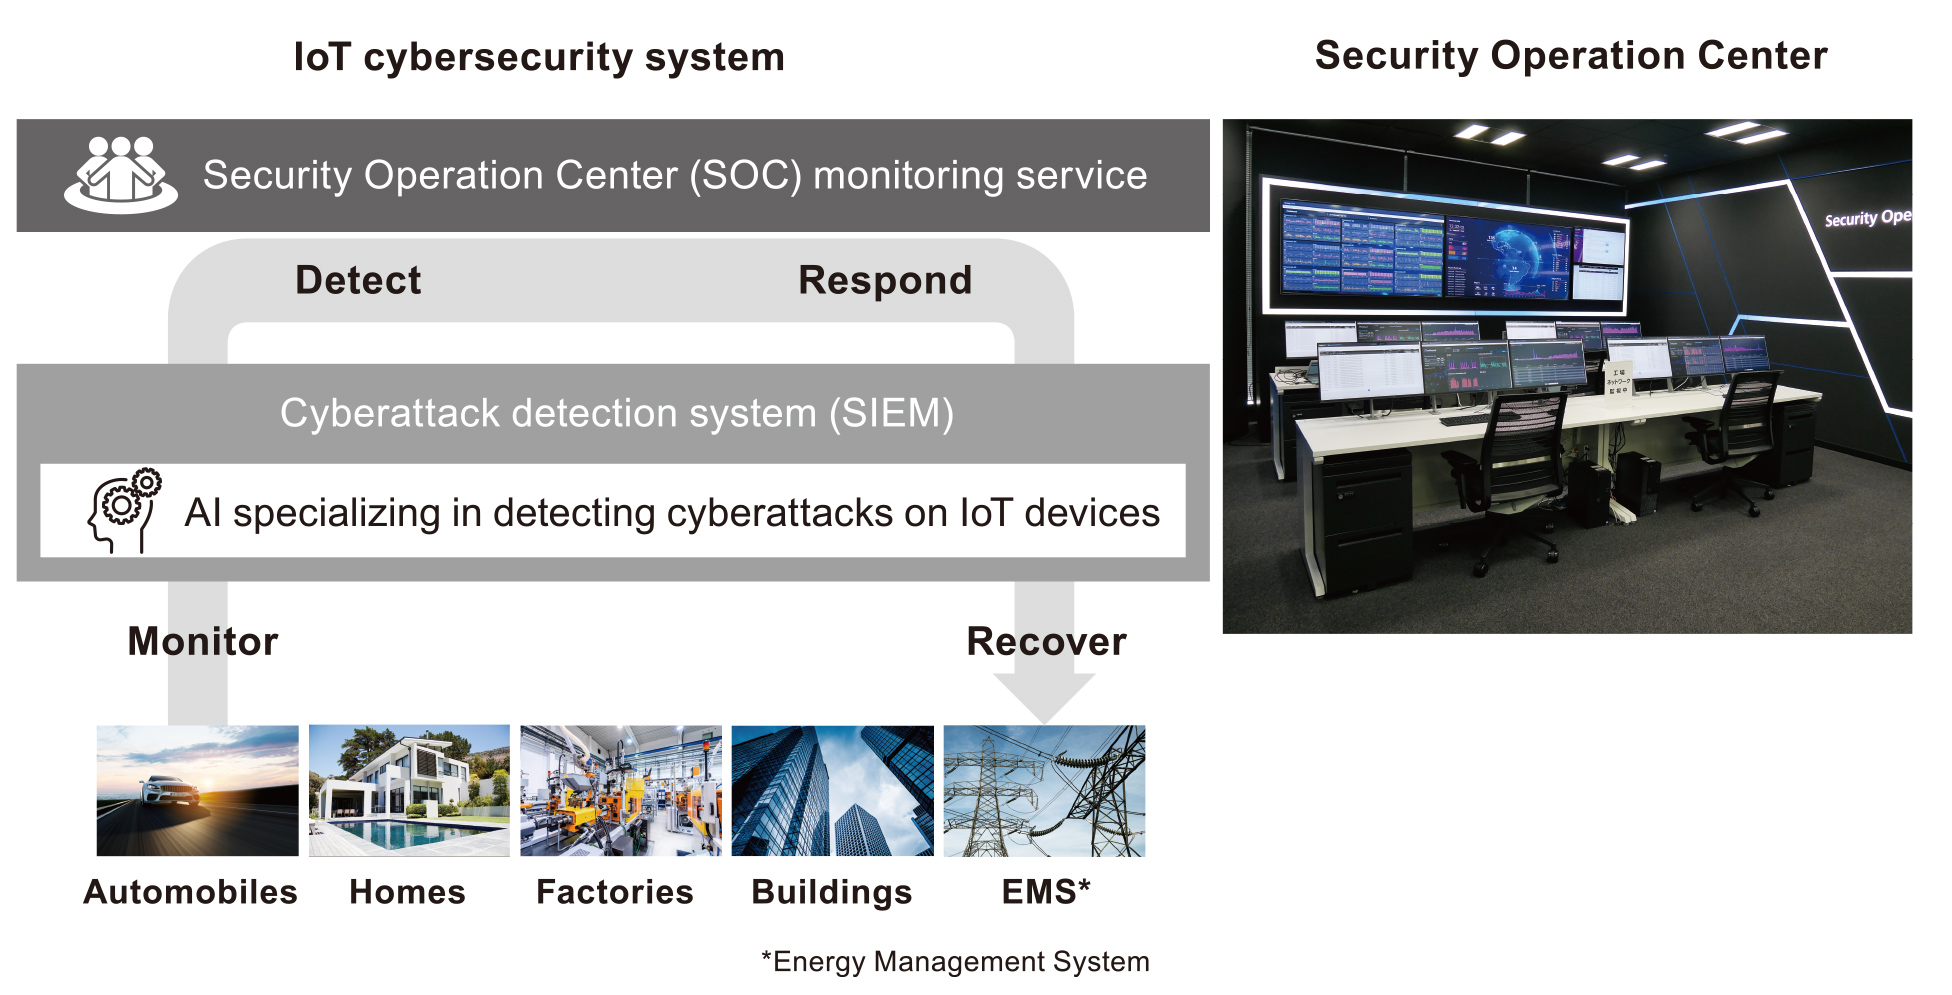 Conceptual diagram of IoT cybersecurity system and photos of a futuristic security operations center.